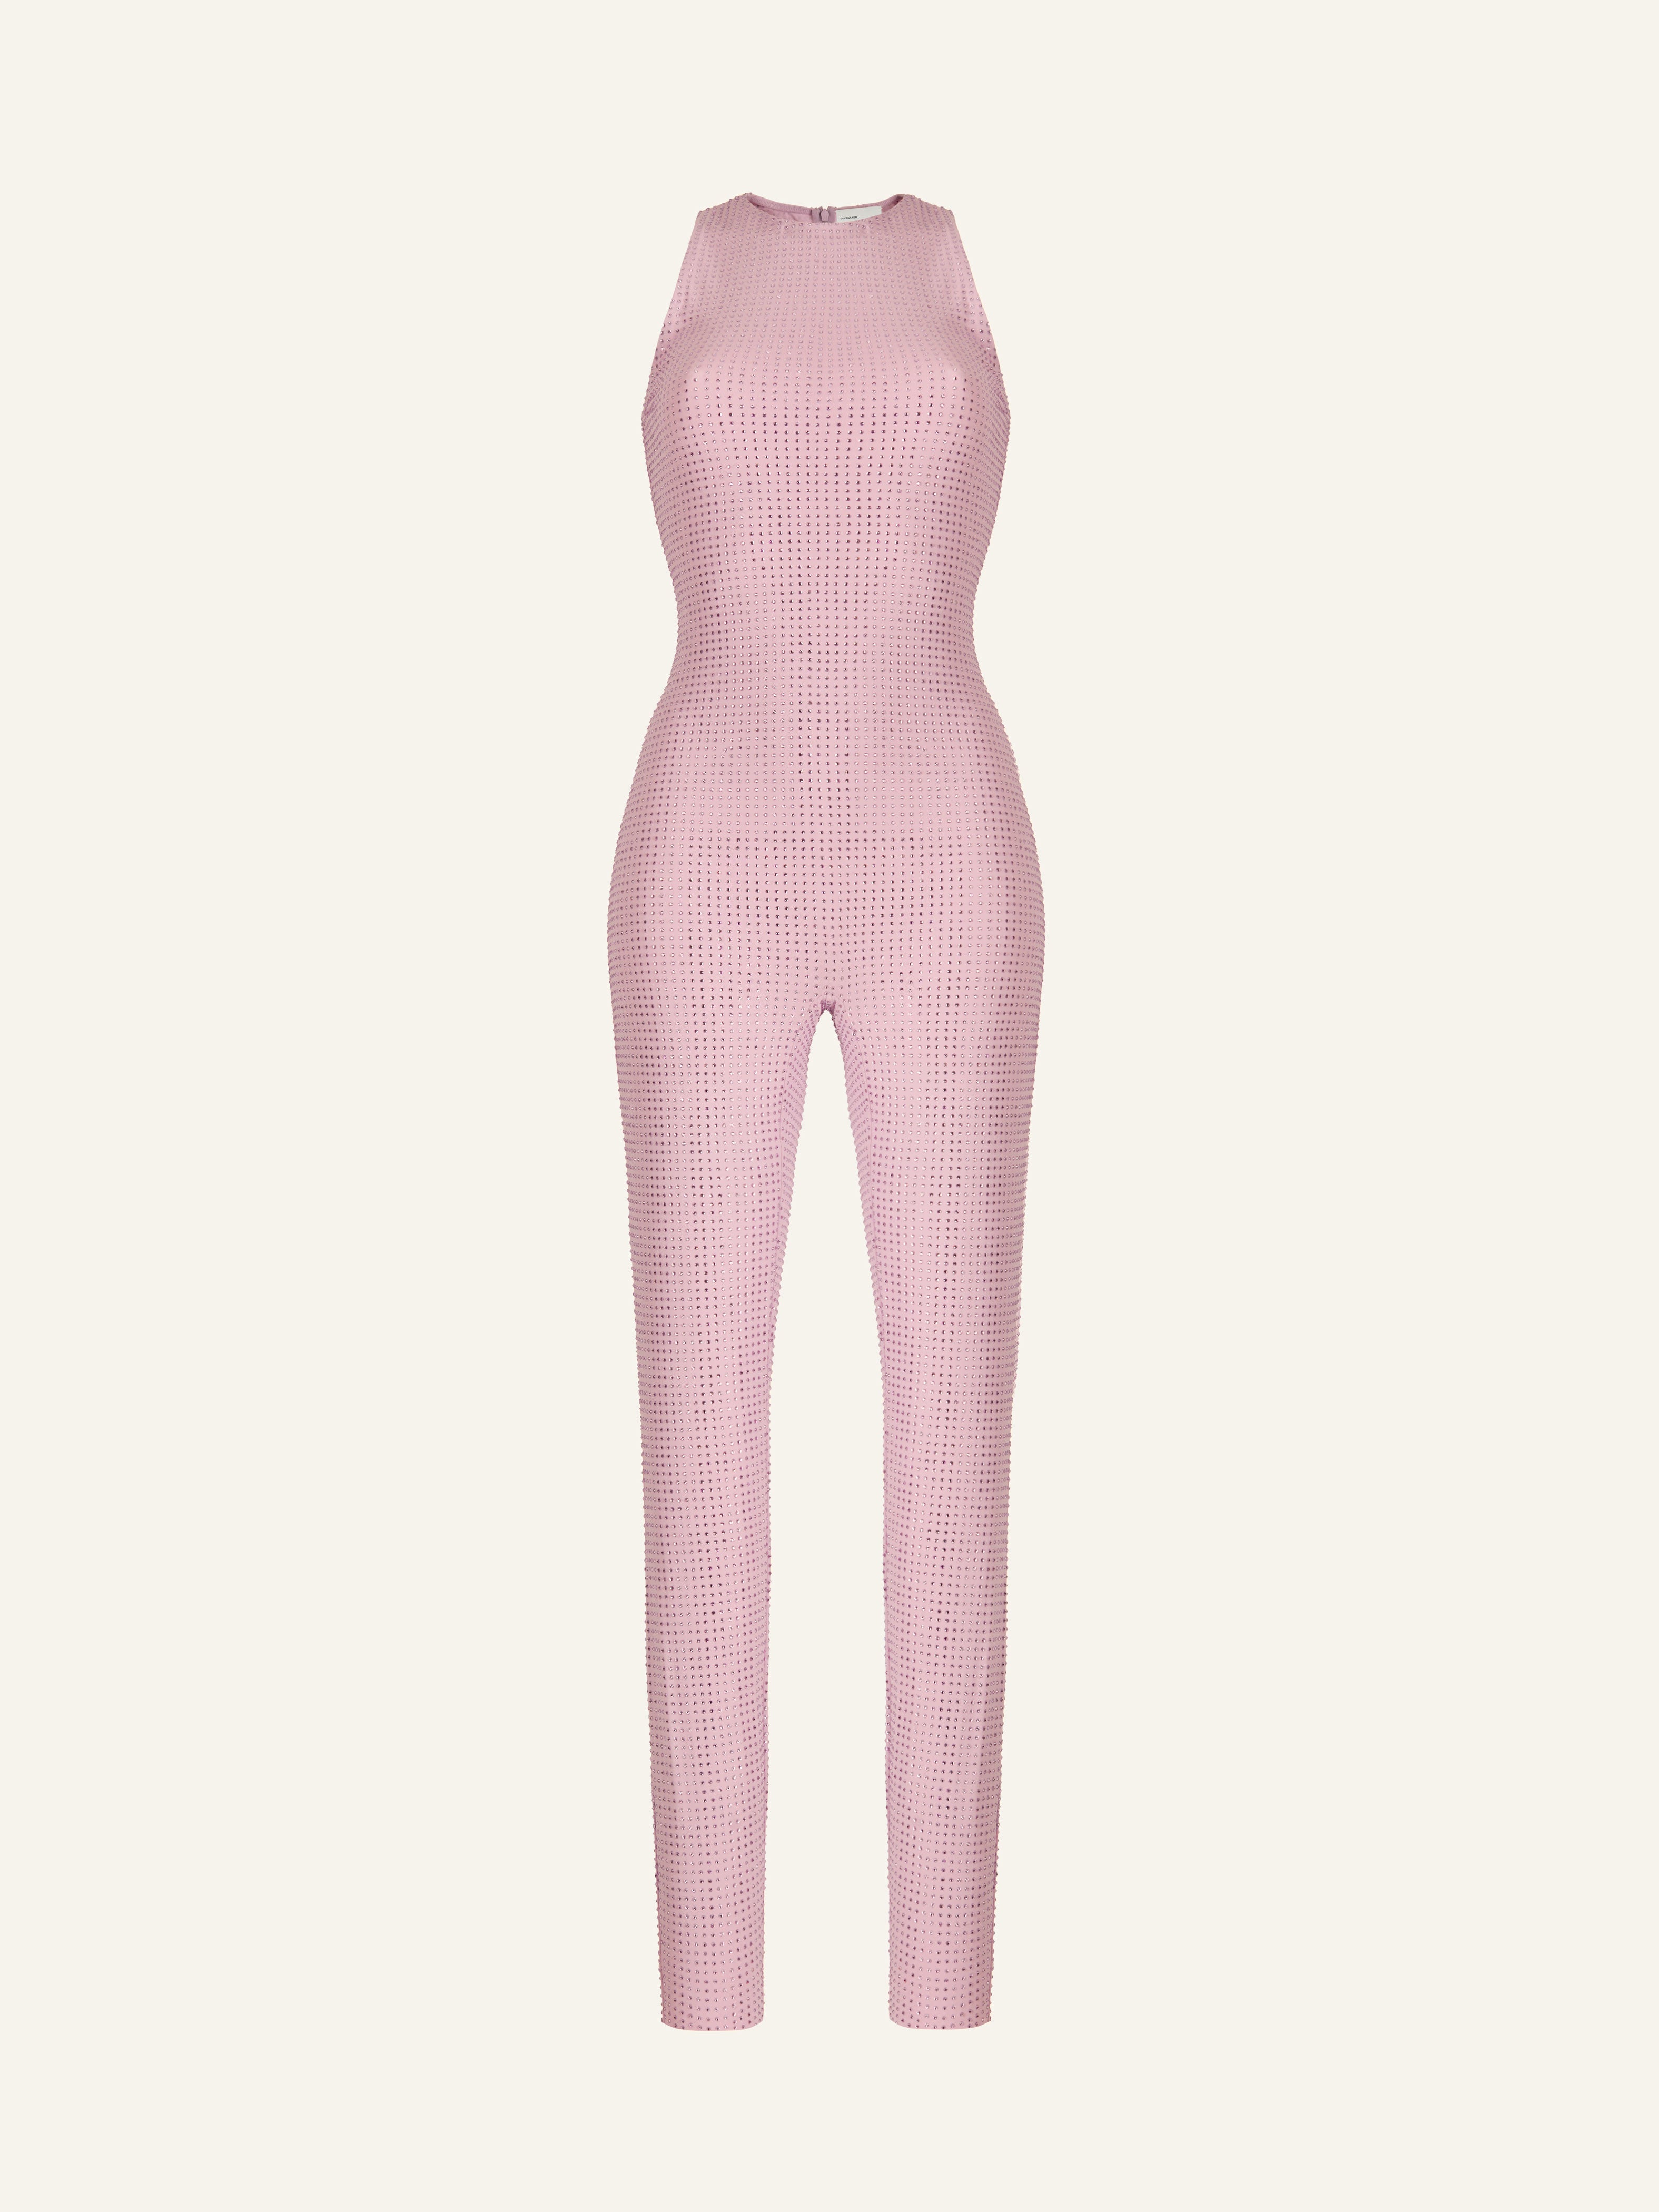 Product photo of a pink sleeveless jumpsuit decorated with Swarovski crystals